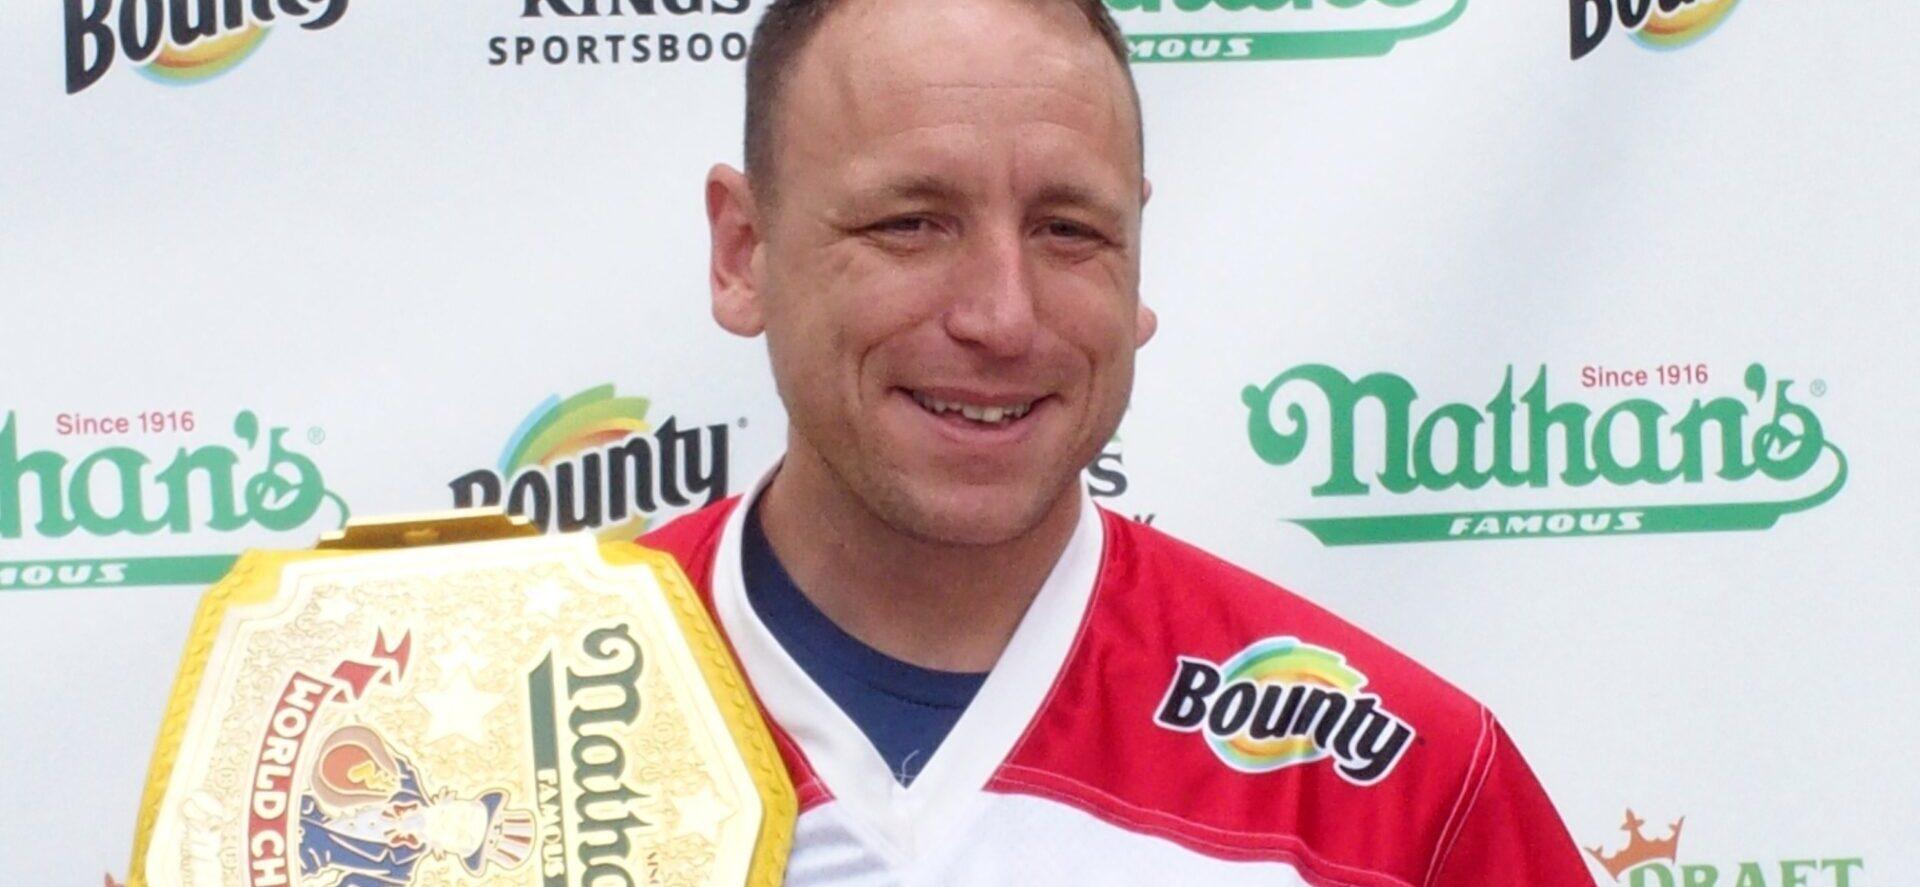 Joey Chestnut holding a plate of hot dogs at Nathan's July 4th Hot Dog Eating Contest 2021